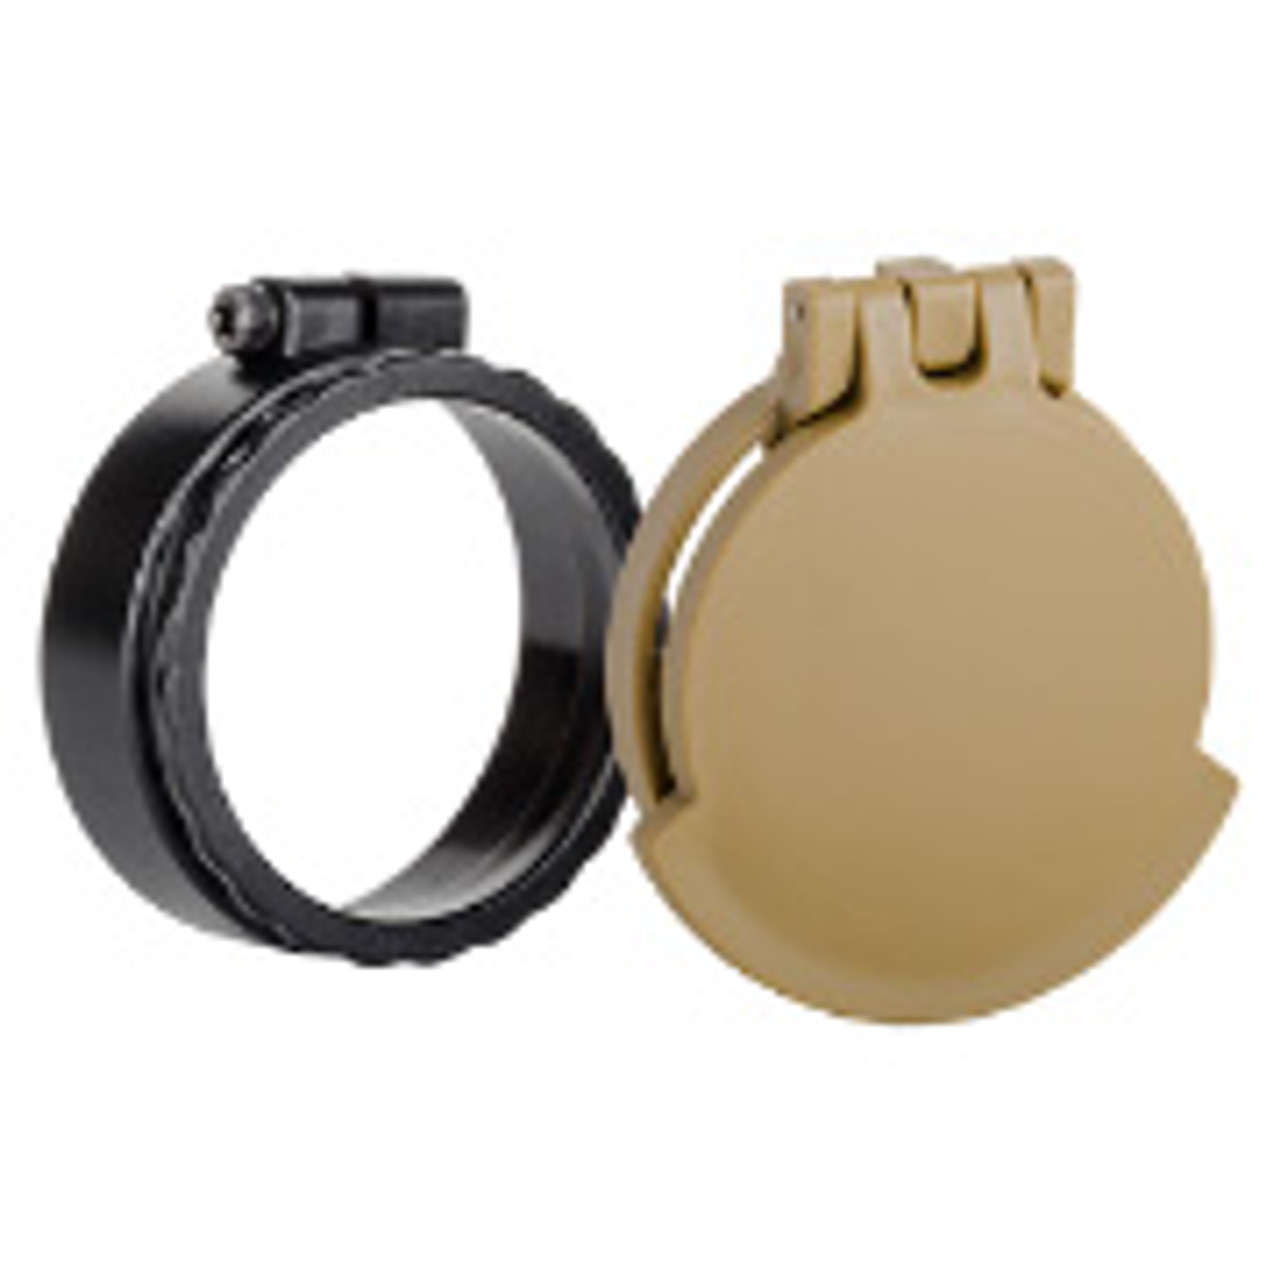 Scope Cover with Adapter Ring for Leupold Mark 5 HD 7-35x56 